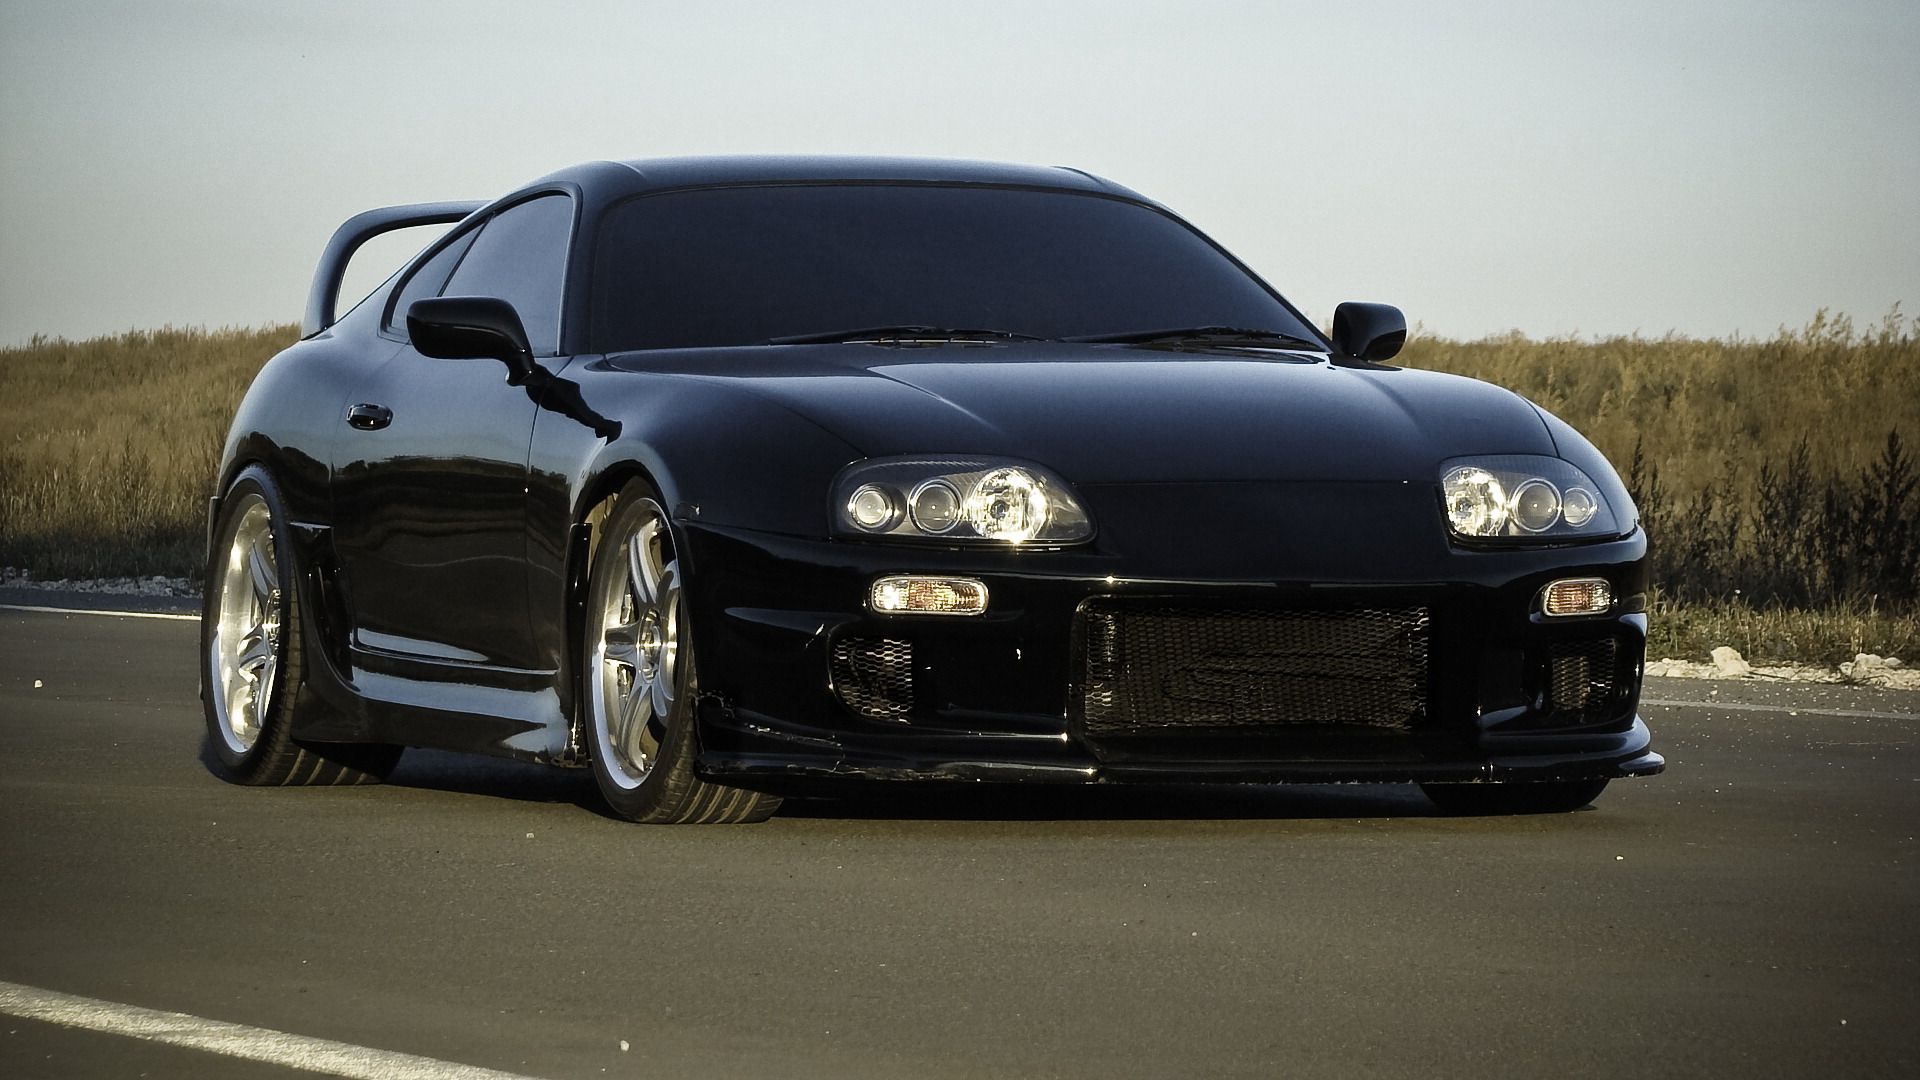 56 Of The Greatest Sports Performance Cars Of The 1990s